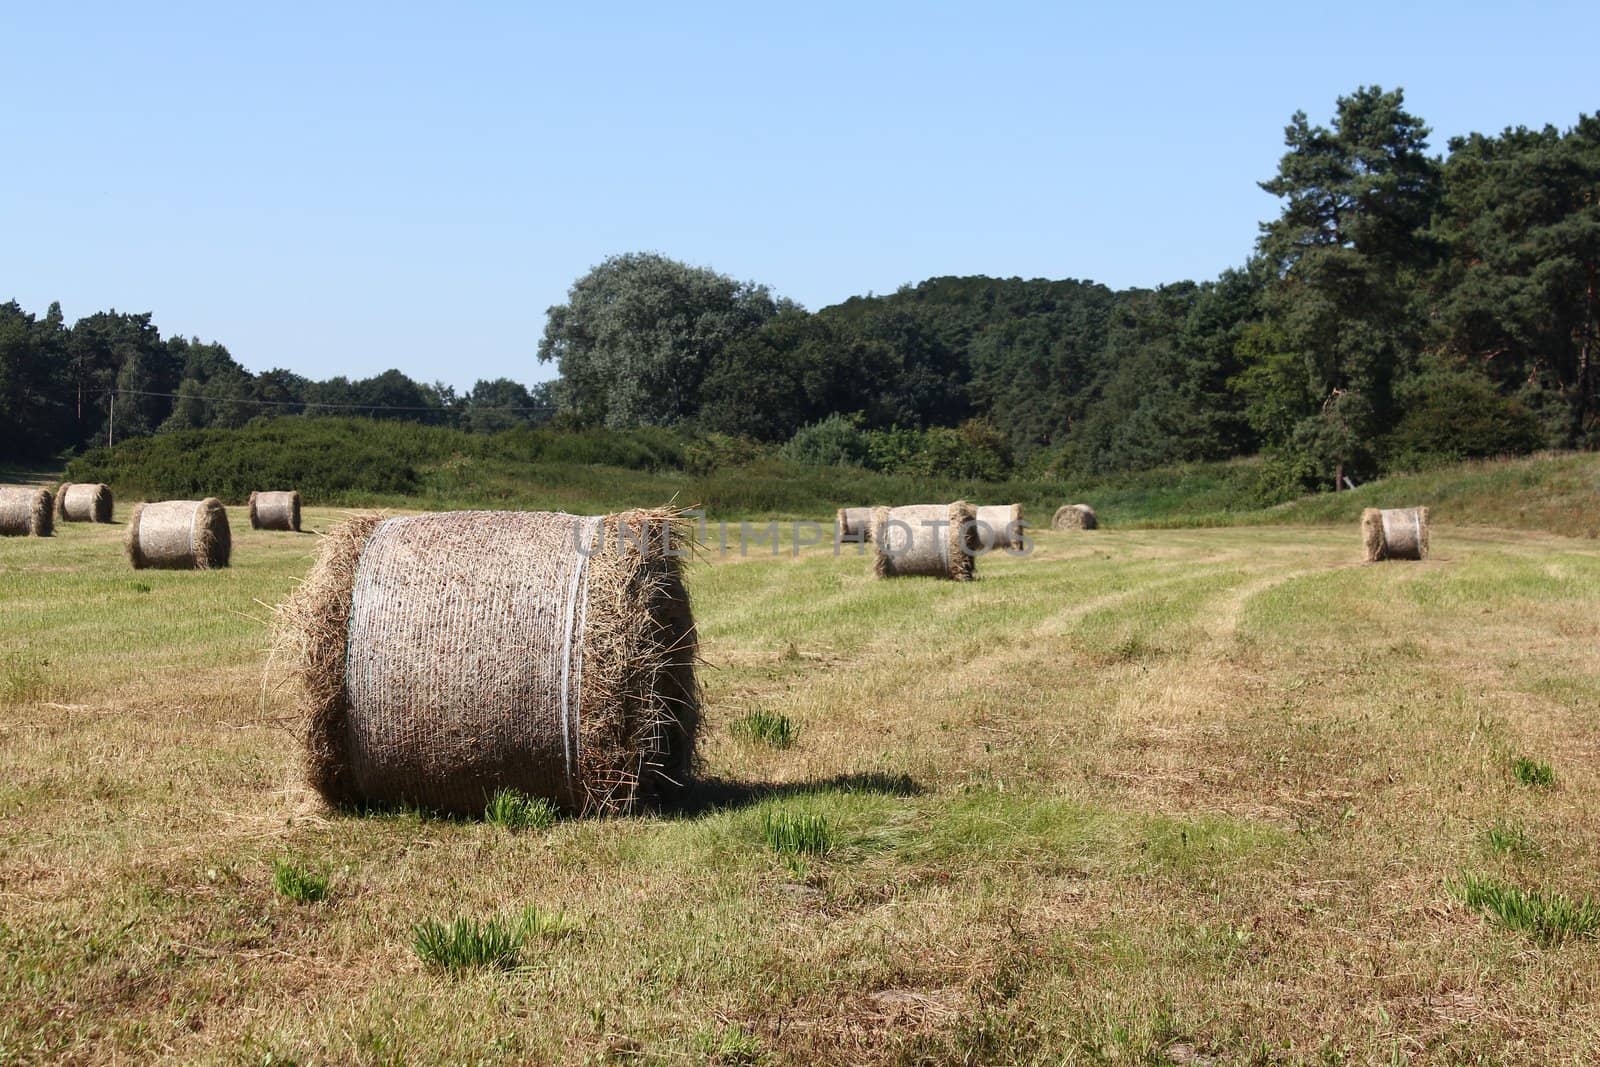 harvested field with straw bales on the edge